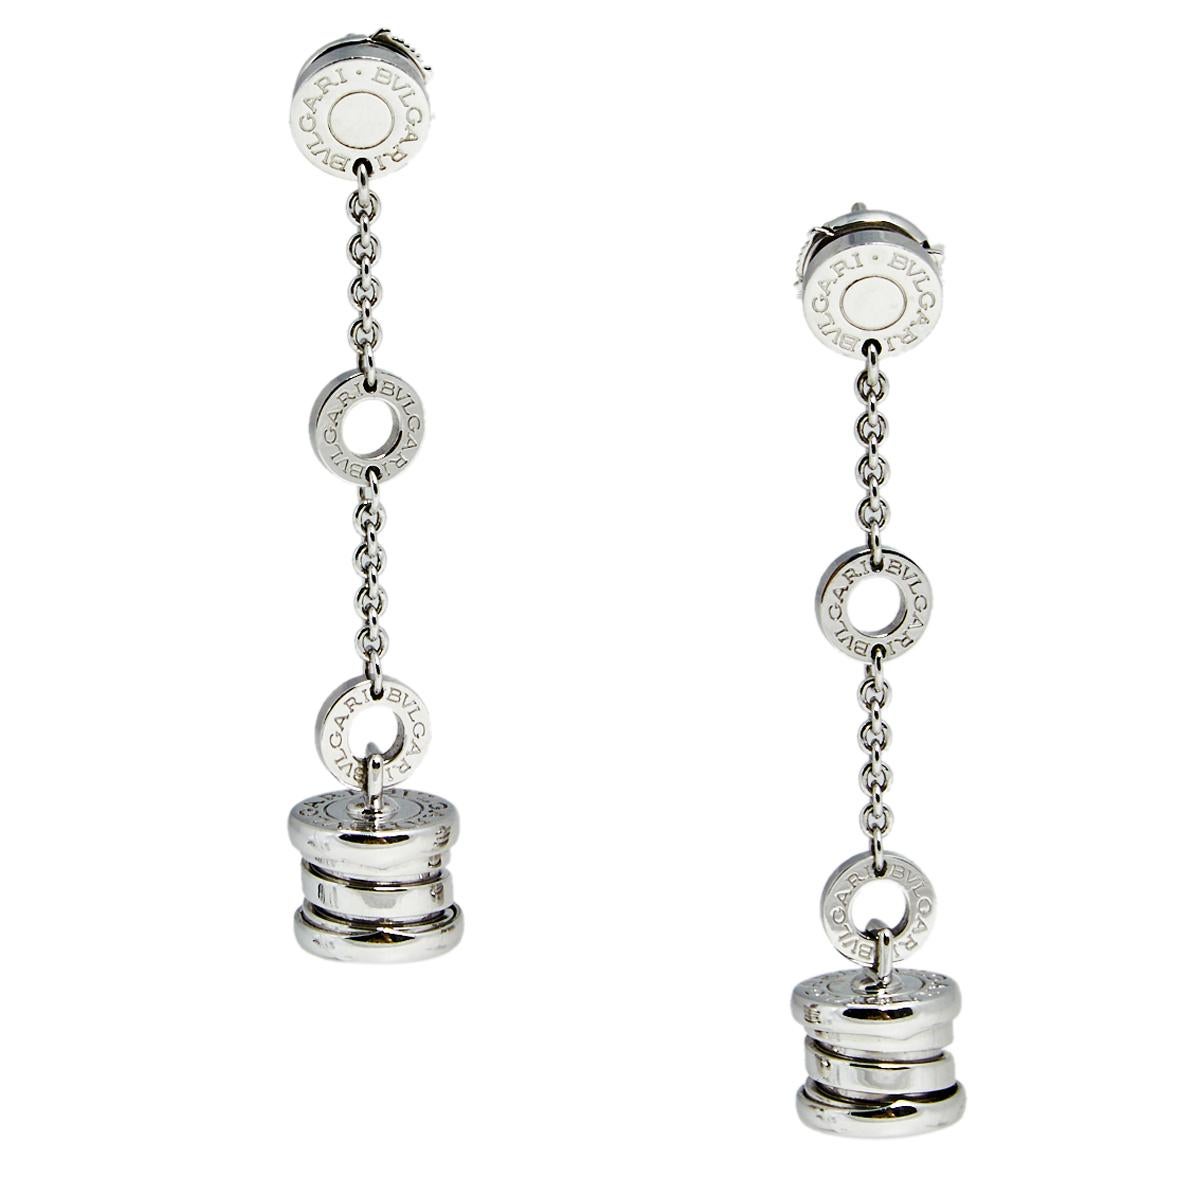 This lovely pair of earrings are by Bvlgari from the B Zero1 collection. Crafted from solid 18K white gold featuring a button top with a chain-link attaching another hope to continue to the B Zero 1 design strung through the hoops and dangling